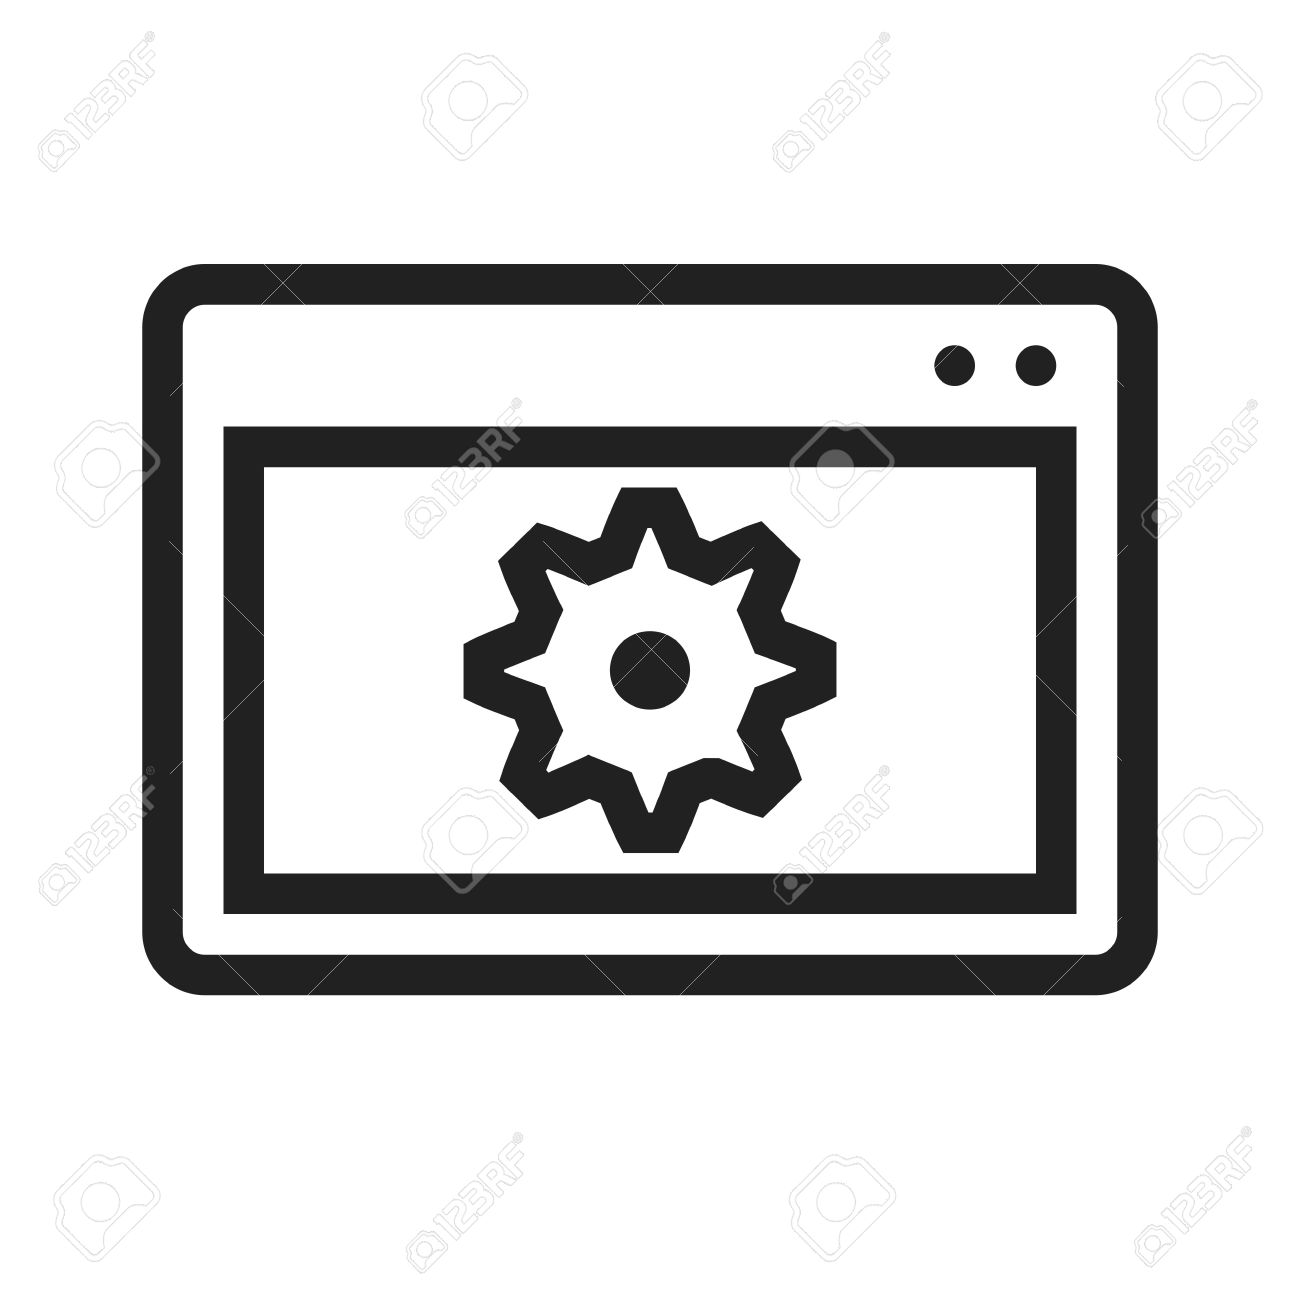 Archive, computer engineering, development, folder with gear 